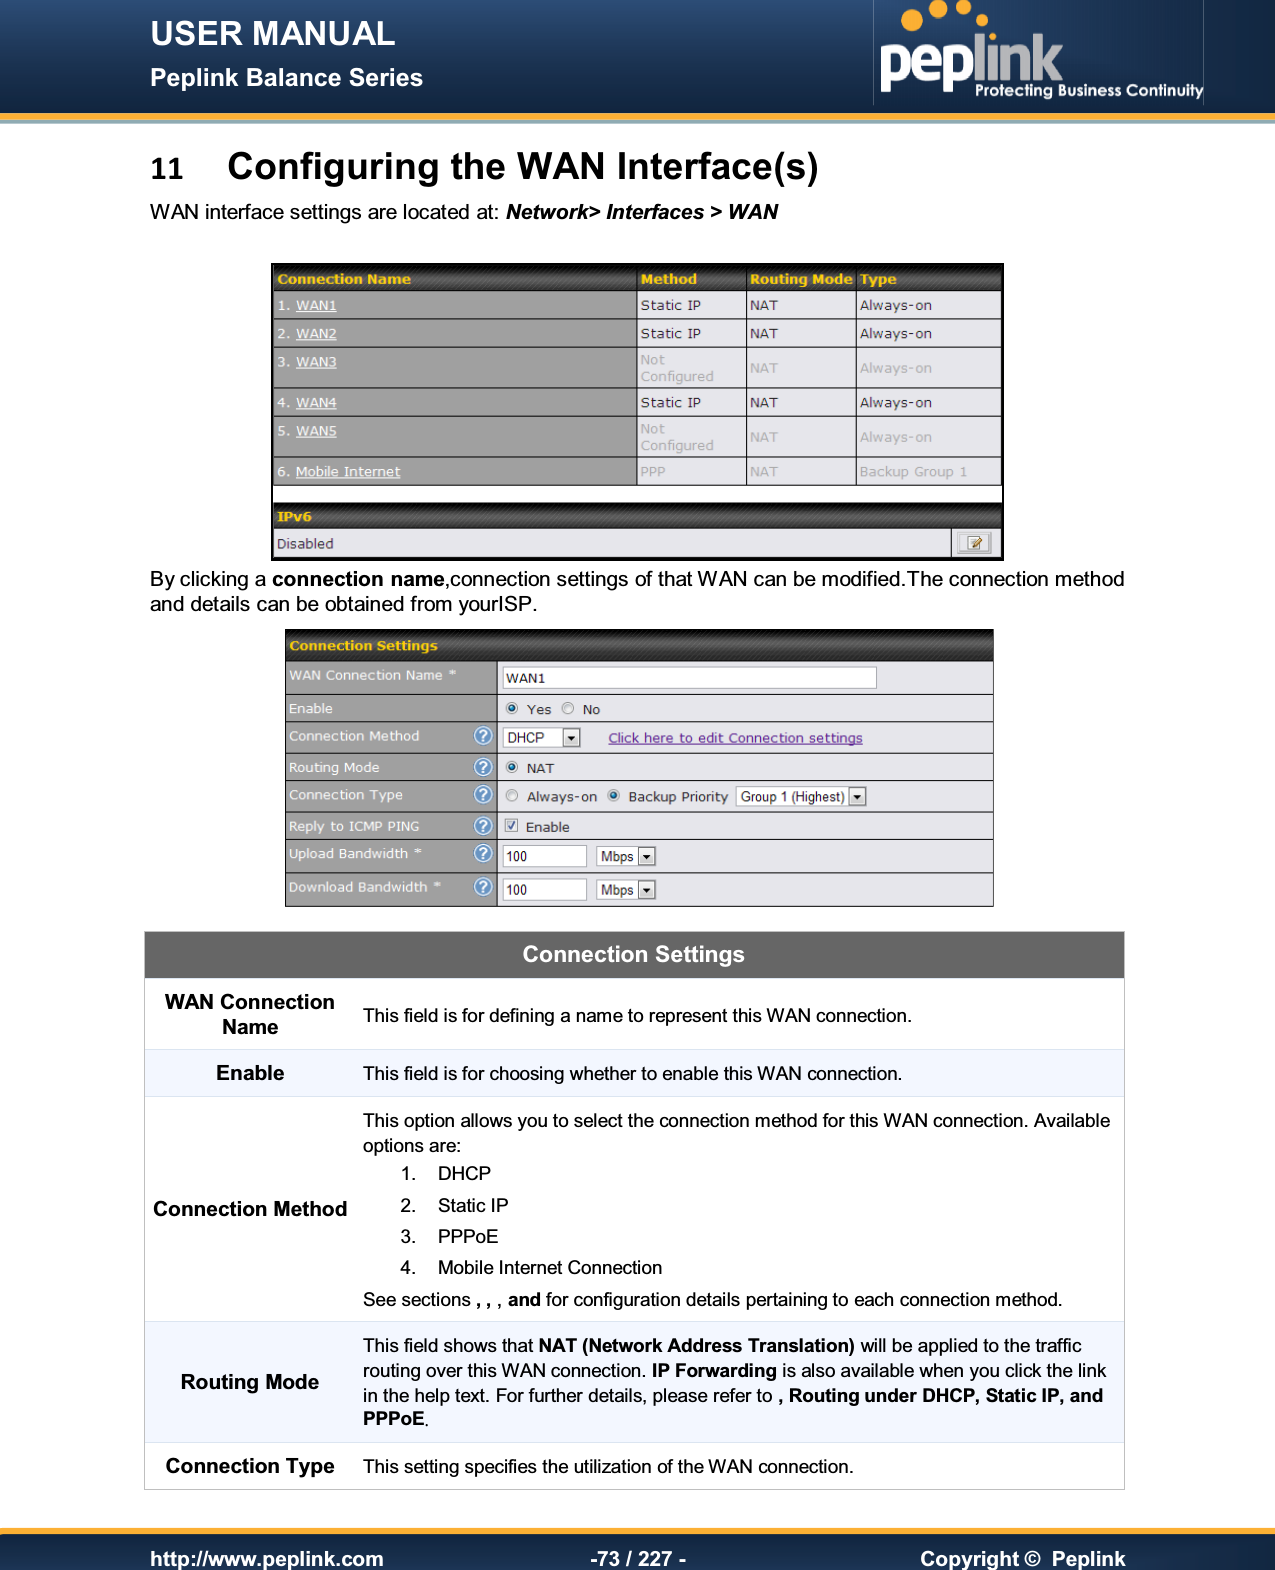 USER MANUAL Peplink Balance Series   http://www.peplink.com -73 / 227 -  Copyright ©  Peplink 11 Configuring the WAN Interface(s) WAN interface settings are located at: Network&gt; Interfaces &gt; WAN   By clicking a connection name,connection settings of that WAN can be modified.The connection method and details can be obtained from yourISP.  Connection Settings WAN Connection Name This field is for defining a name to represent this WAN connection. Enable This field is for choosing whether to enable this WAN connection. Connection Method This option allows you to select the connection method for this WAN connection. Available options are: 1.  DHCP 2.  Static IP 3.  PPPoE 4.  Mobile Internet Connection See sections , , , and for configuration details pertaining to each connection method. Routing Mode This field shows that NAT (Network Address Translation) will be applied to the traffic routing over this WAN connection. IP Forwarding is also available when you click the link in the help text. For further details, please refer to , Routing under DHCP, Static IP, and PPPoEį Connection Type This setting specifies the utilization of the WAN connection. 